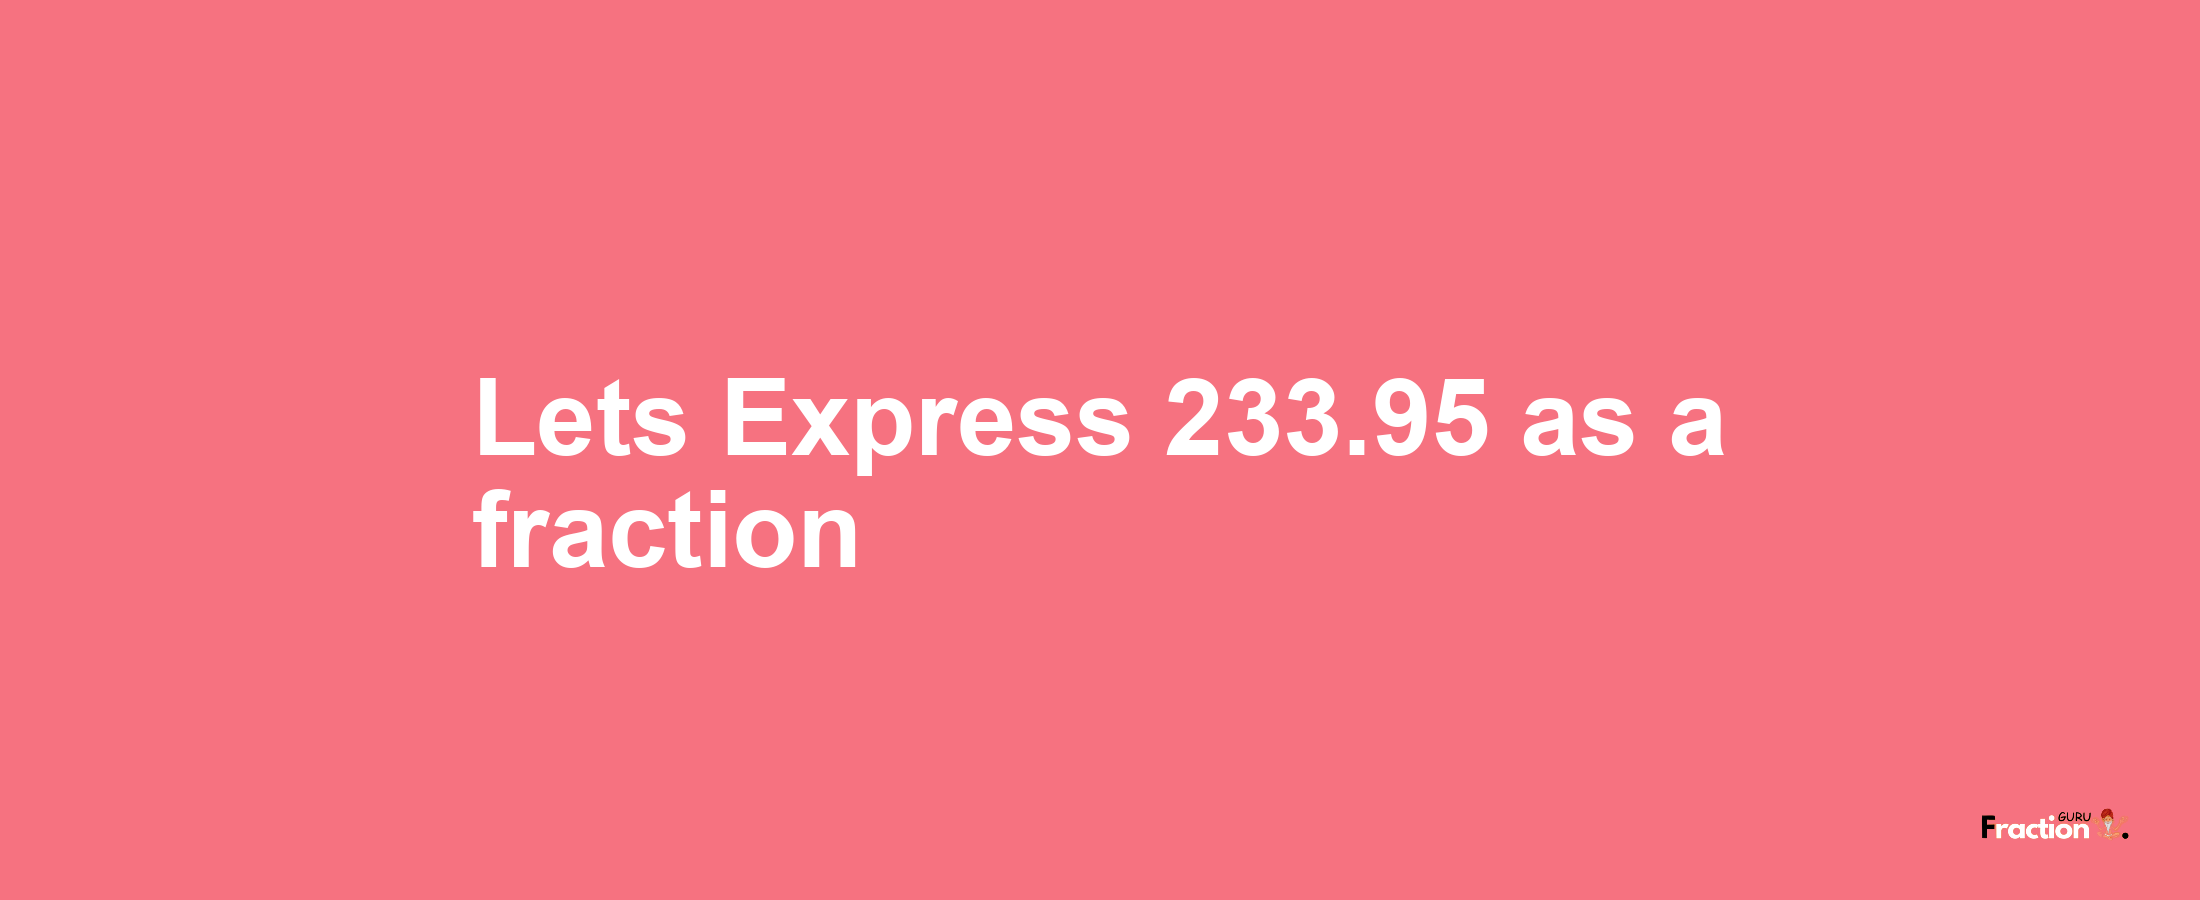 Lets Express 233.95 as afraction